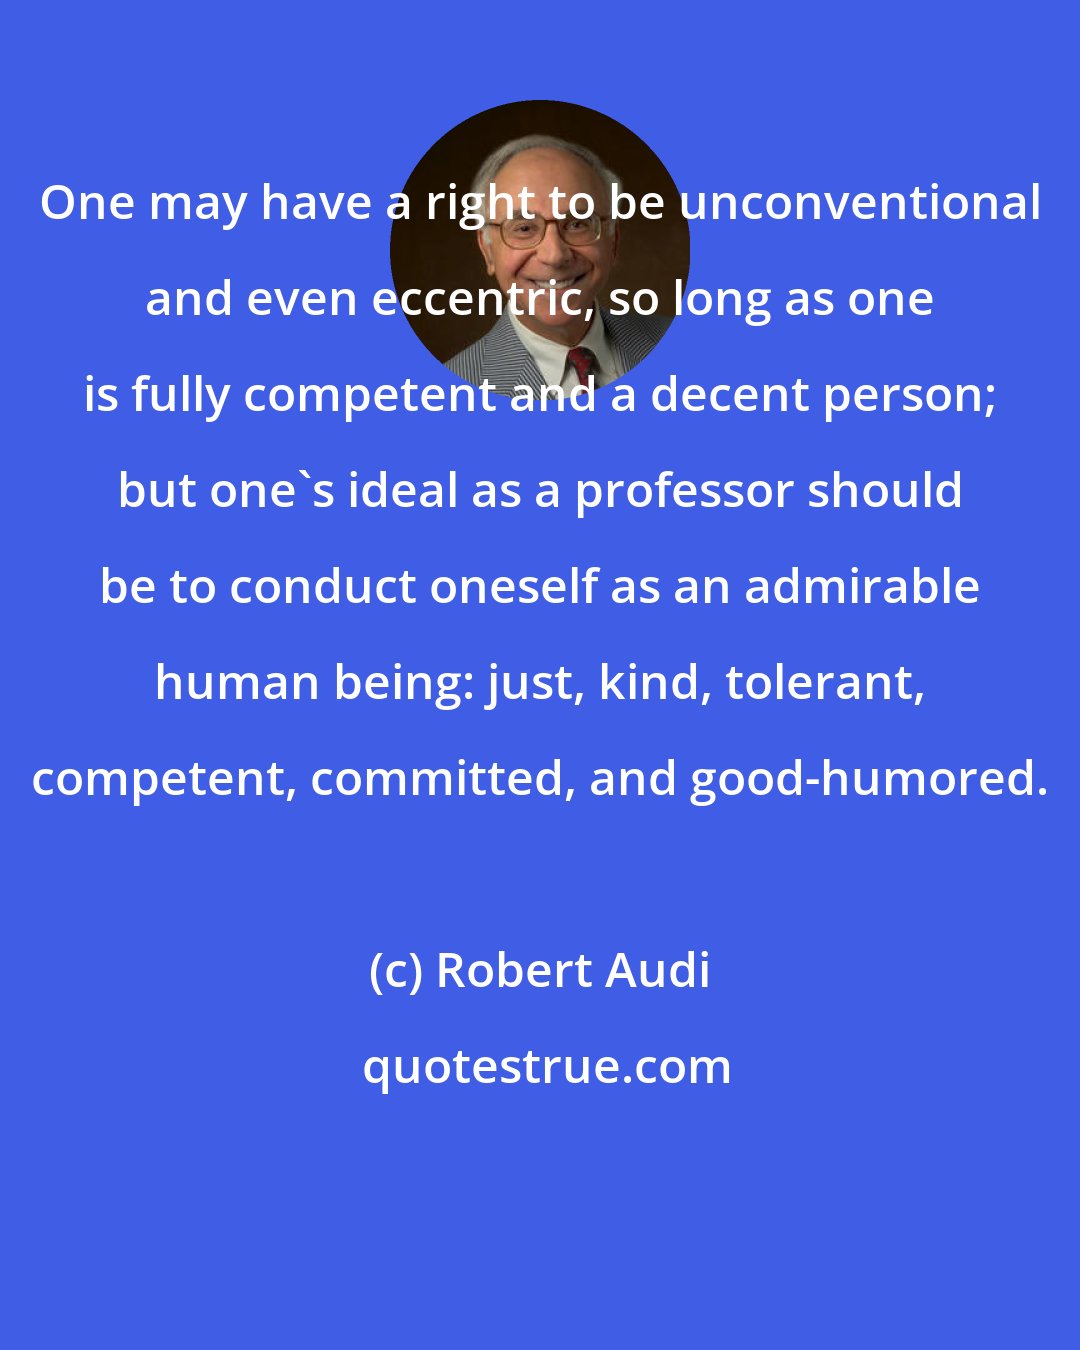 Robert Audi: One may have a right to be unconventional and even eccentric, so long as one is fully competent and a decent person; but one's ideal as a professor should be to conduct oneself as an admirable human being: just, kind, tolerant, competent, committed, and good-humored.